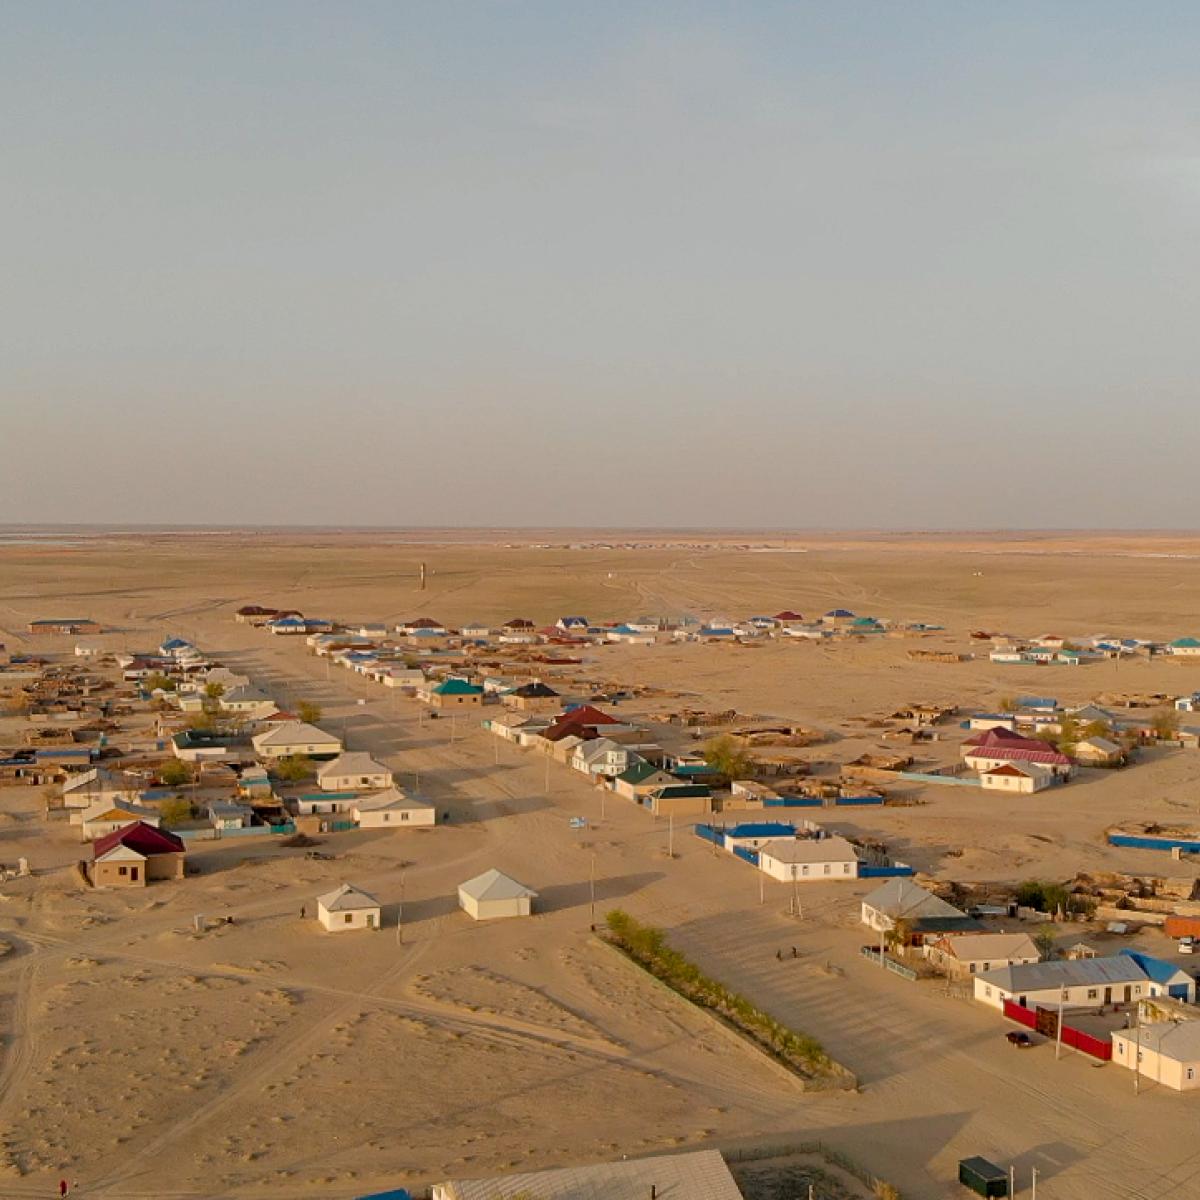 A village near the Aral Sea showing surrounding dry land and houses.